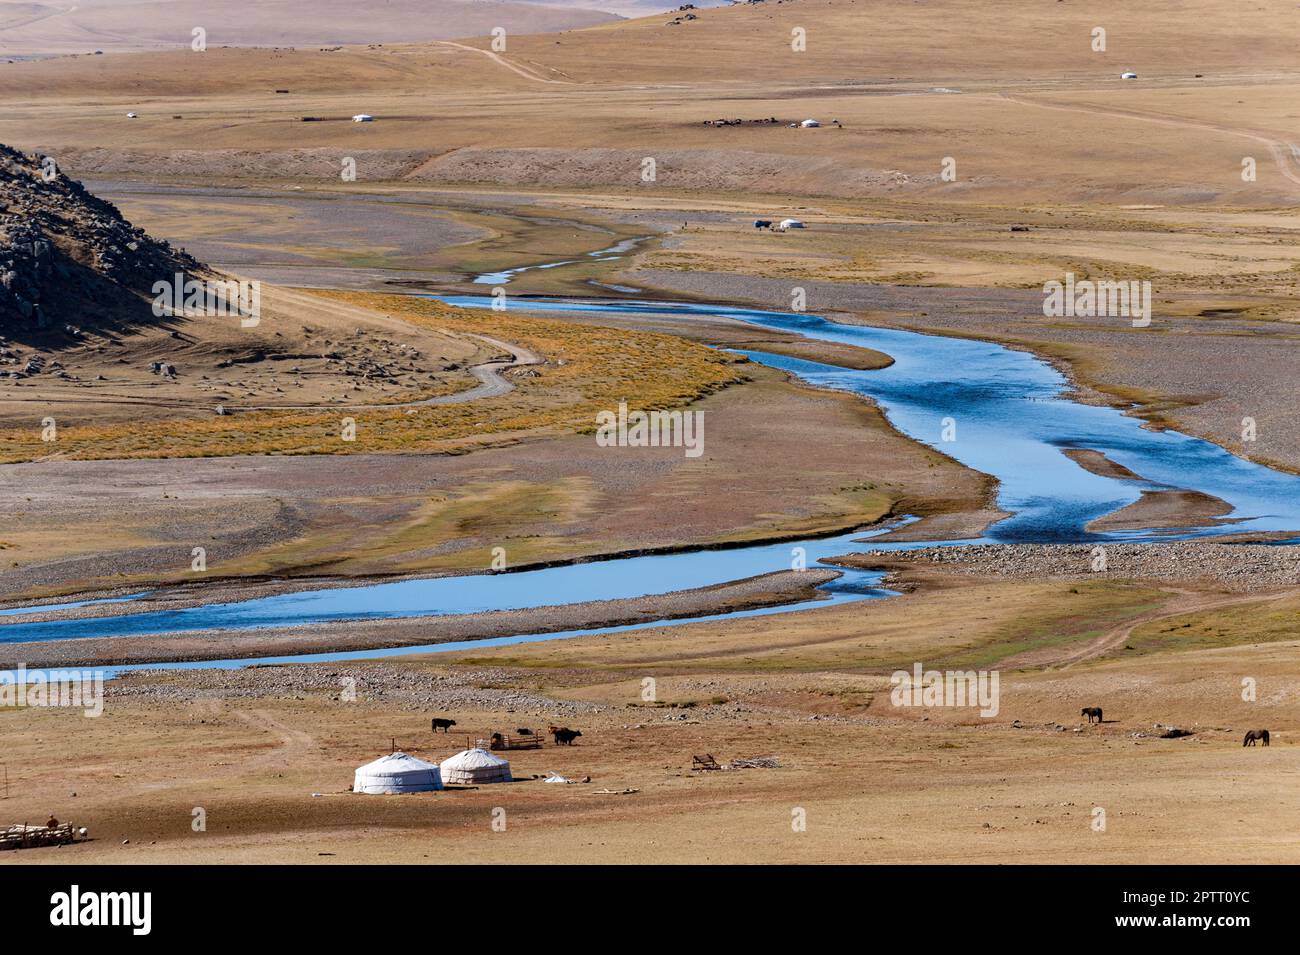 A yurt camp of Mongolian nomads at a river bend in the steppe of Mongolia, Central Asia Stock Photo